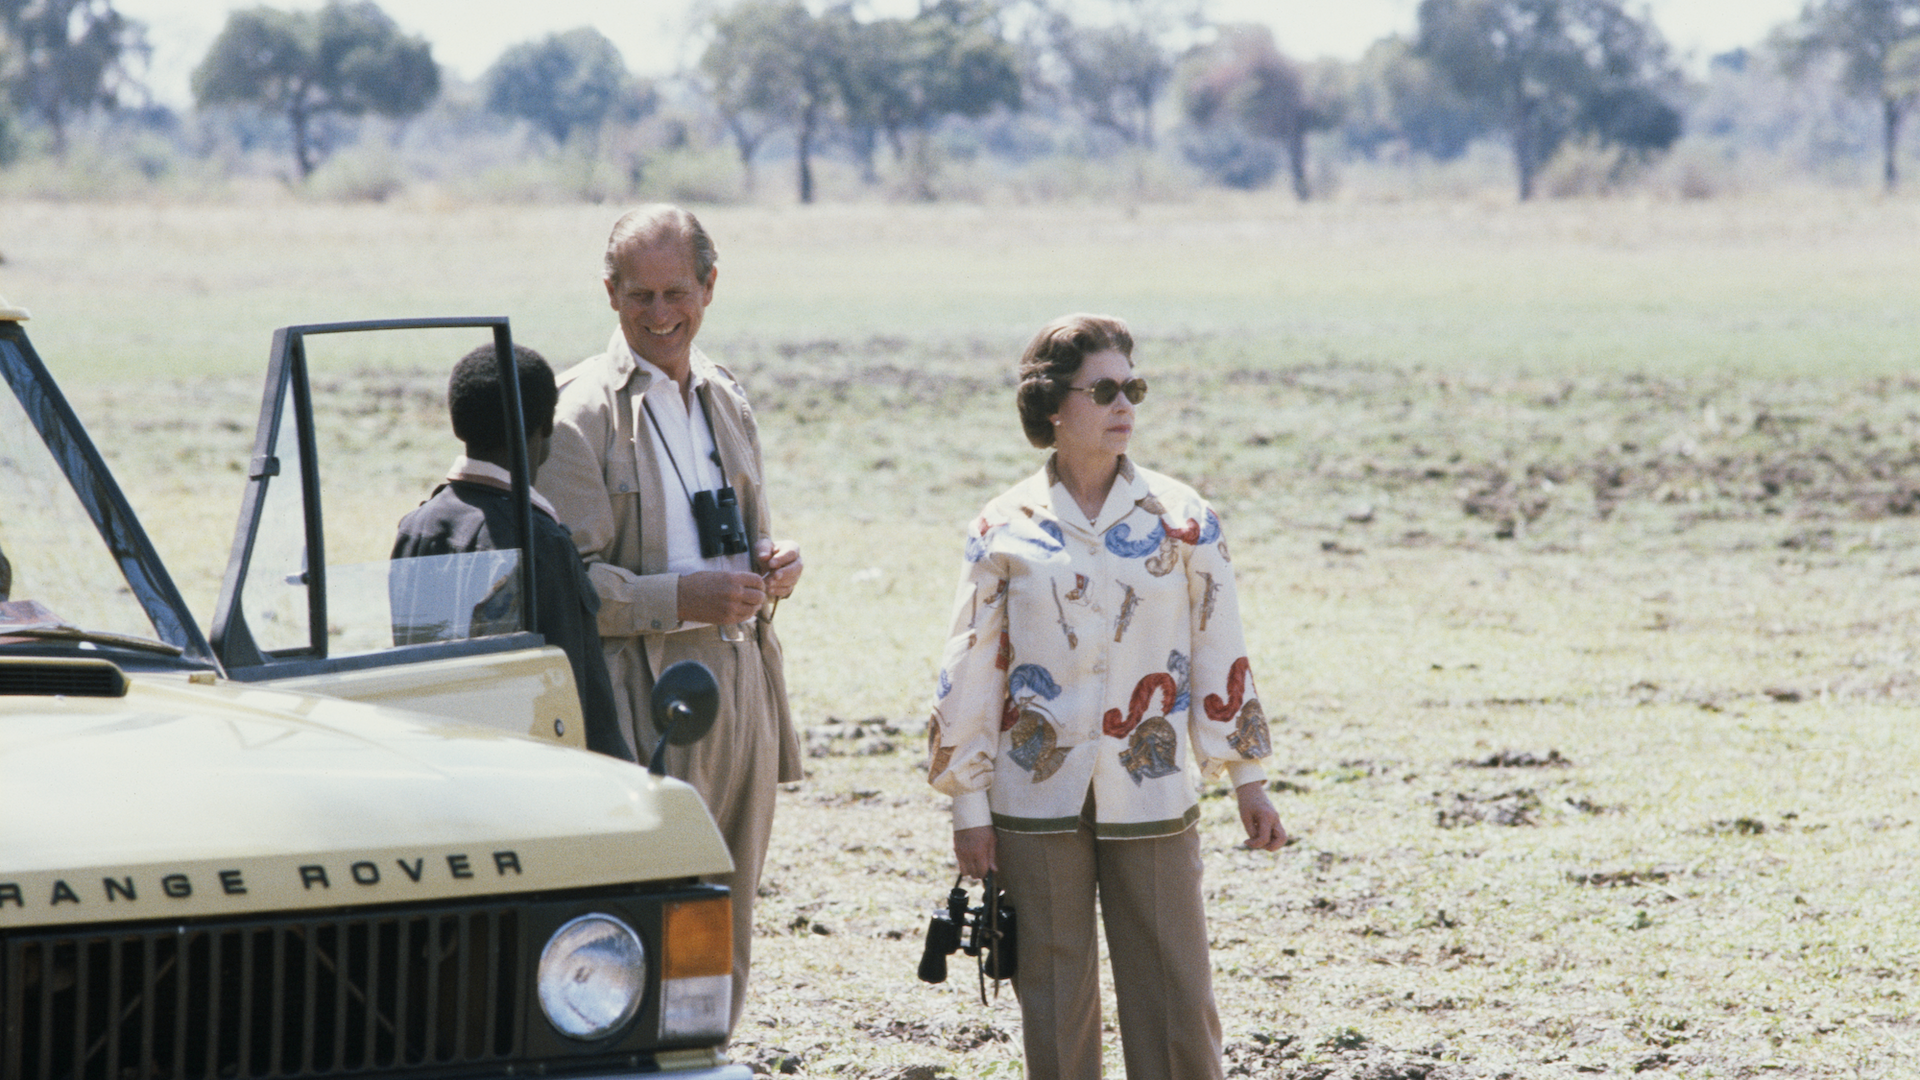 <p>                     Queen Elizabeth and Prince Philip visited Zambia on a 1979 royal tour that also saw them visit Tanzania and Malawi. It was during another African trip that included Kenya, in 1952, that she found out her father King George VI had suddenly passed away and that she would be acceding to the throne.                   </p>